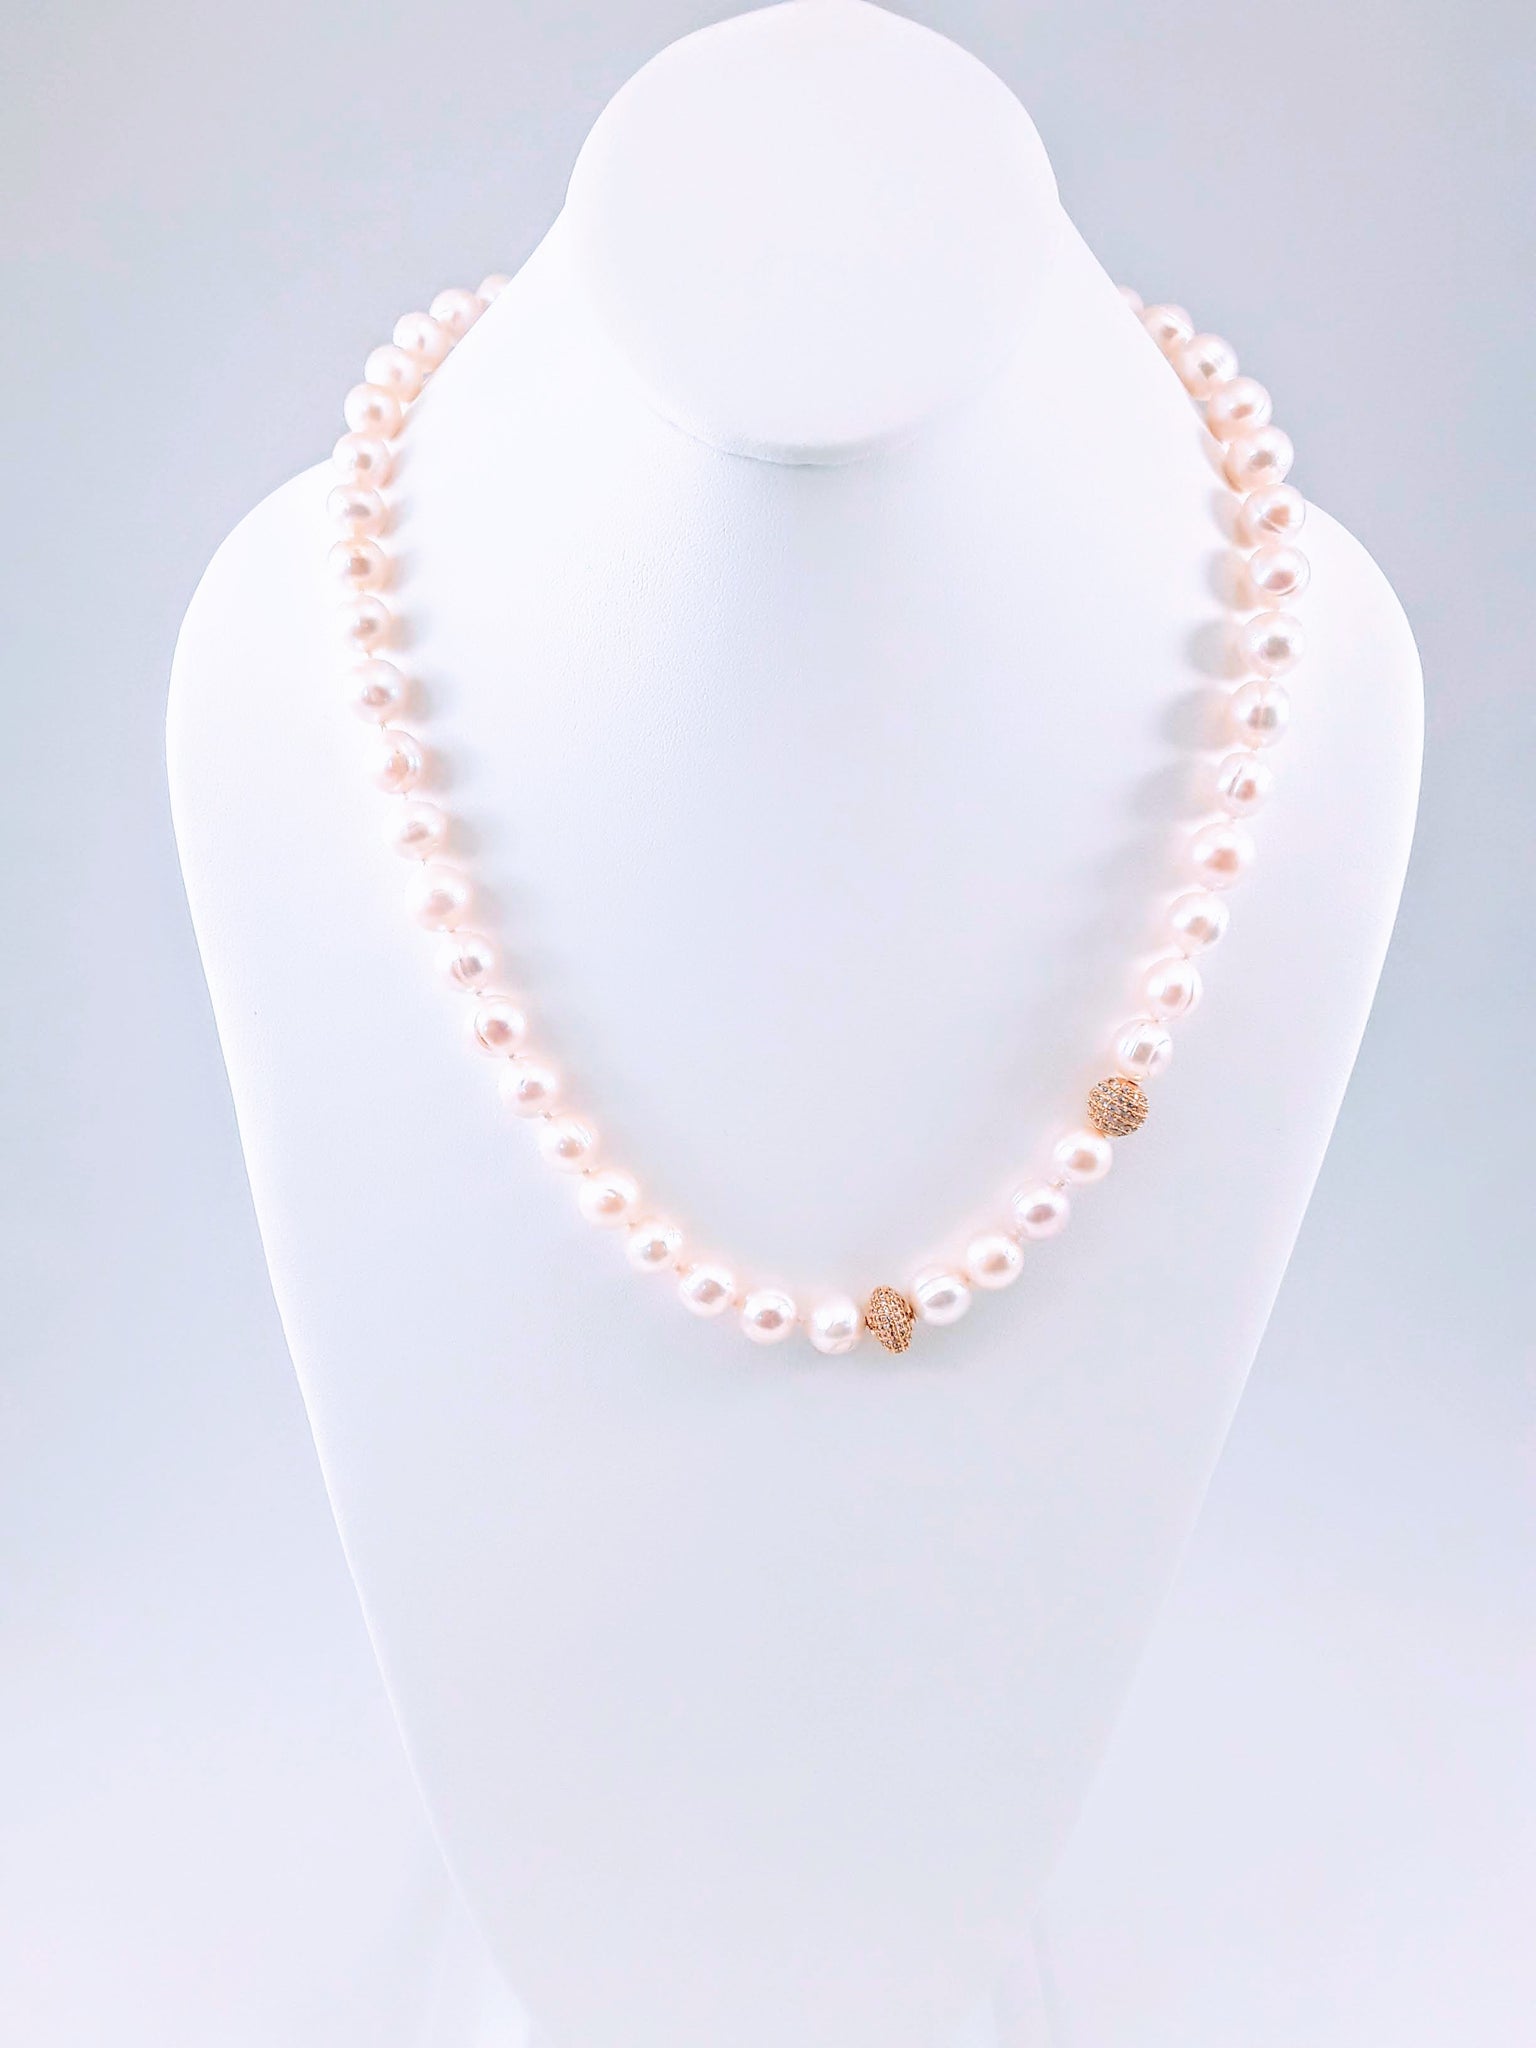 The Classic Knotted Pearl